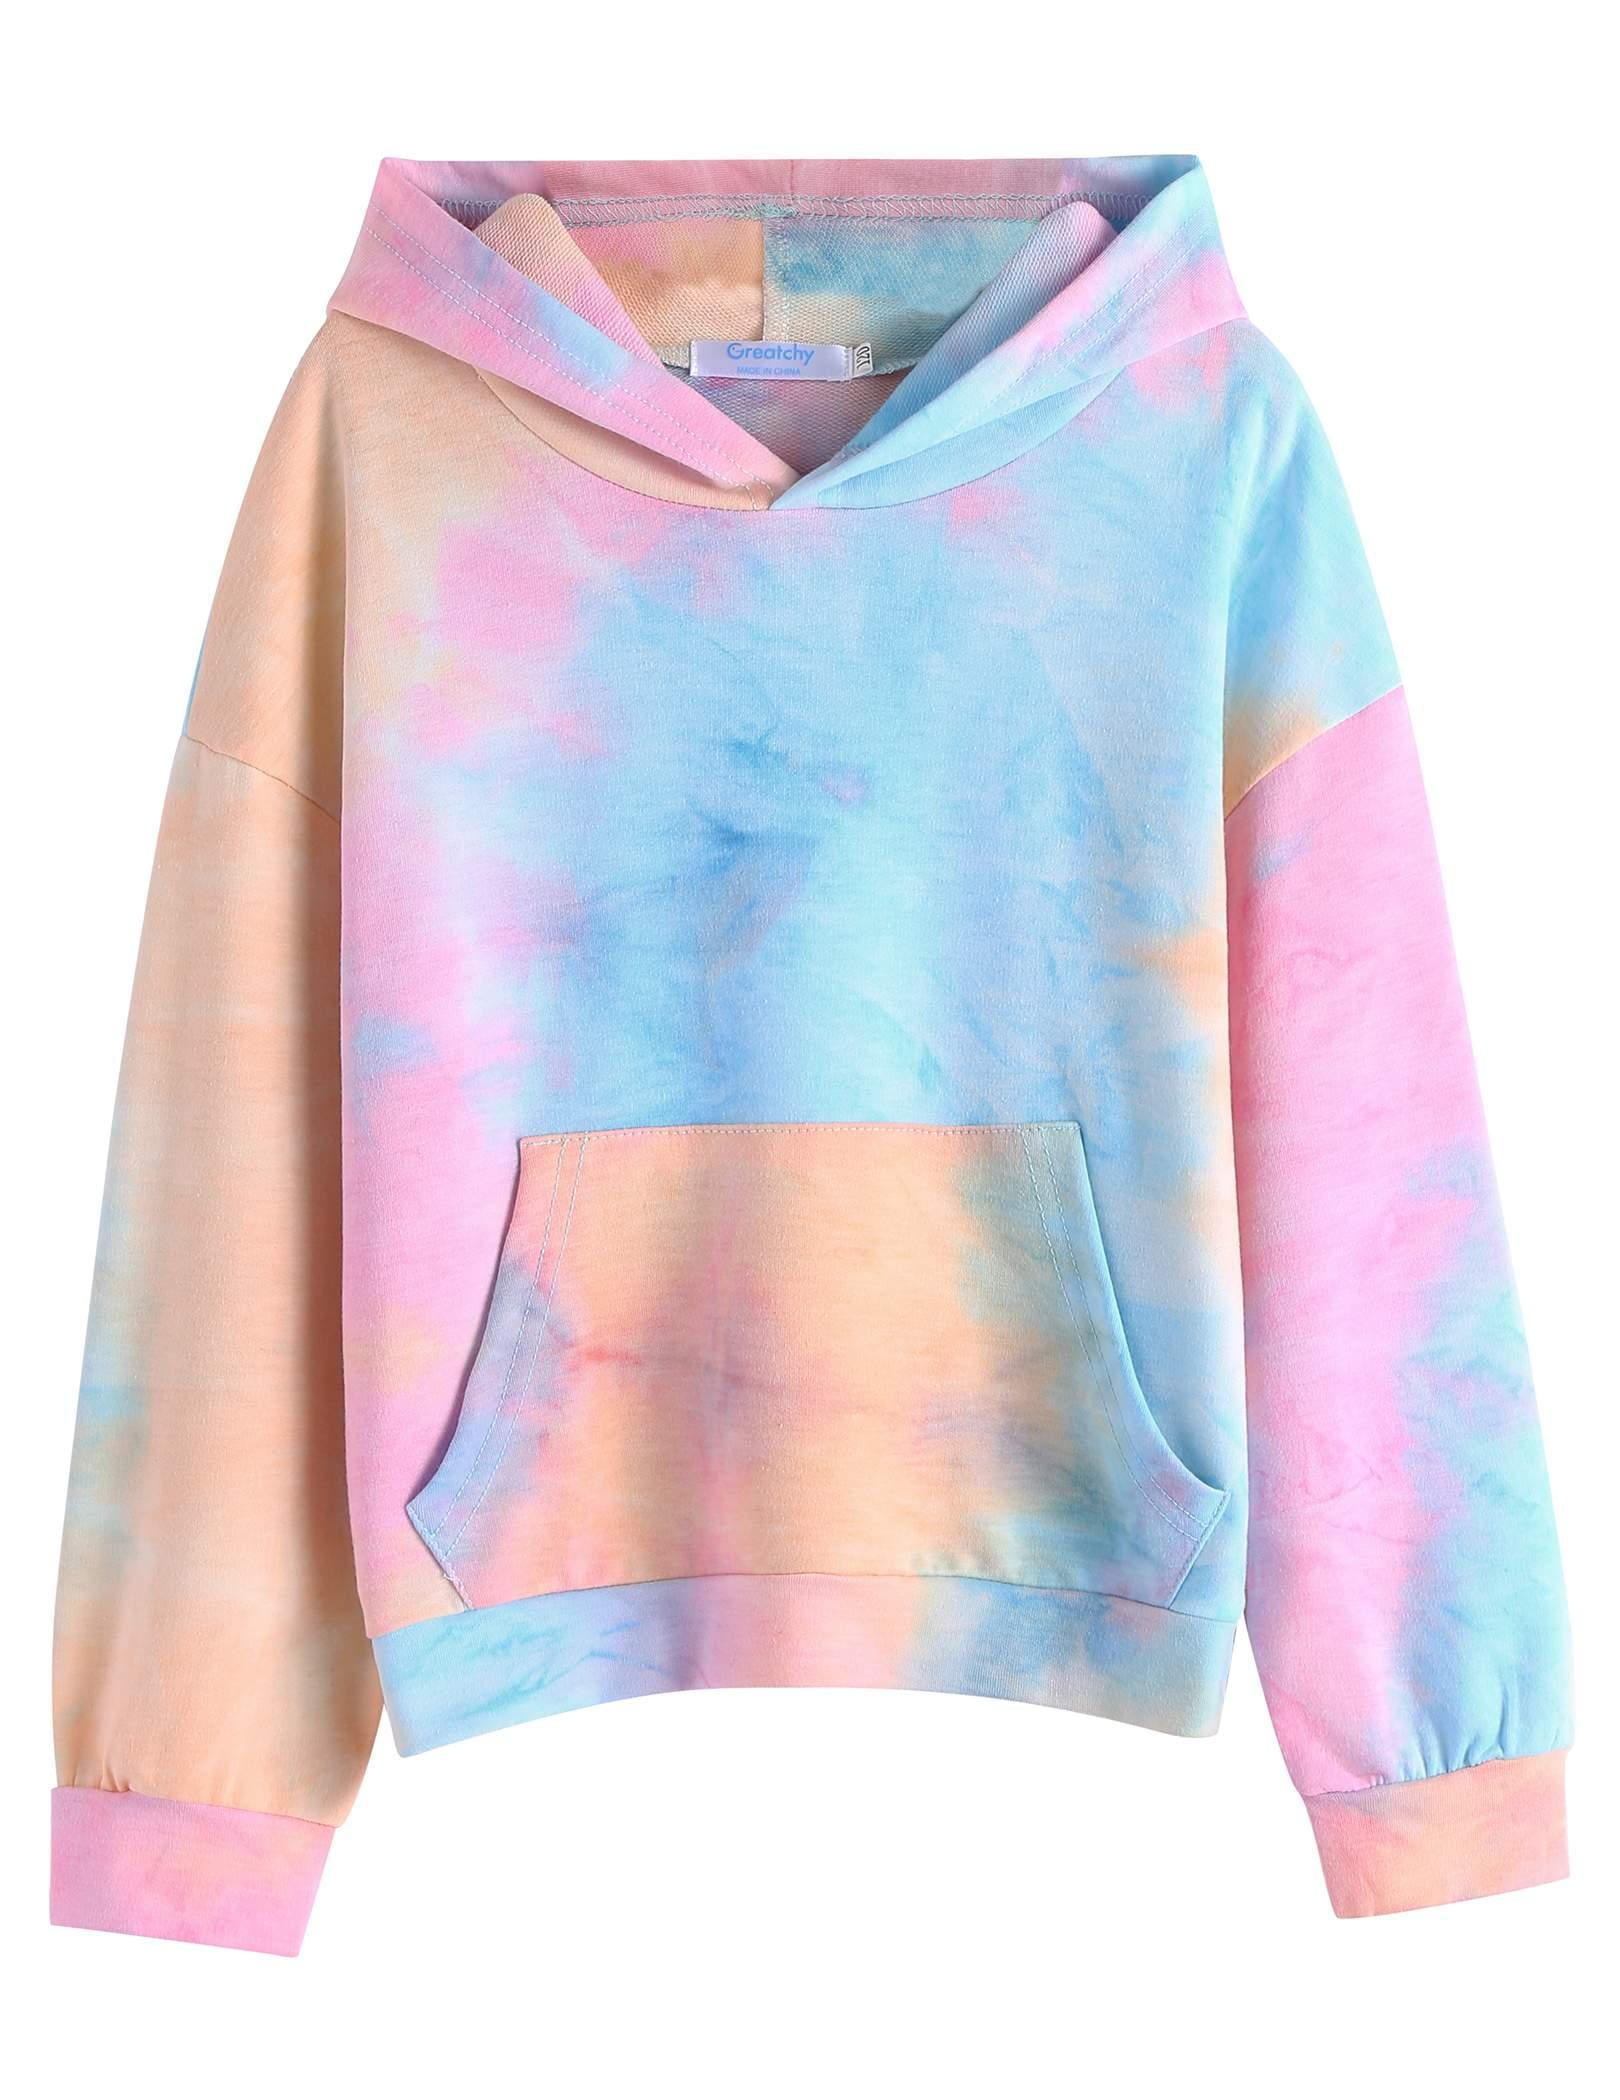 Greatchy Girls Tie Dye Hoodies Sweatshirts Loose Casual Long Sleeve Pullover Hooded With Pockets 